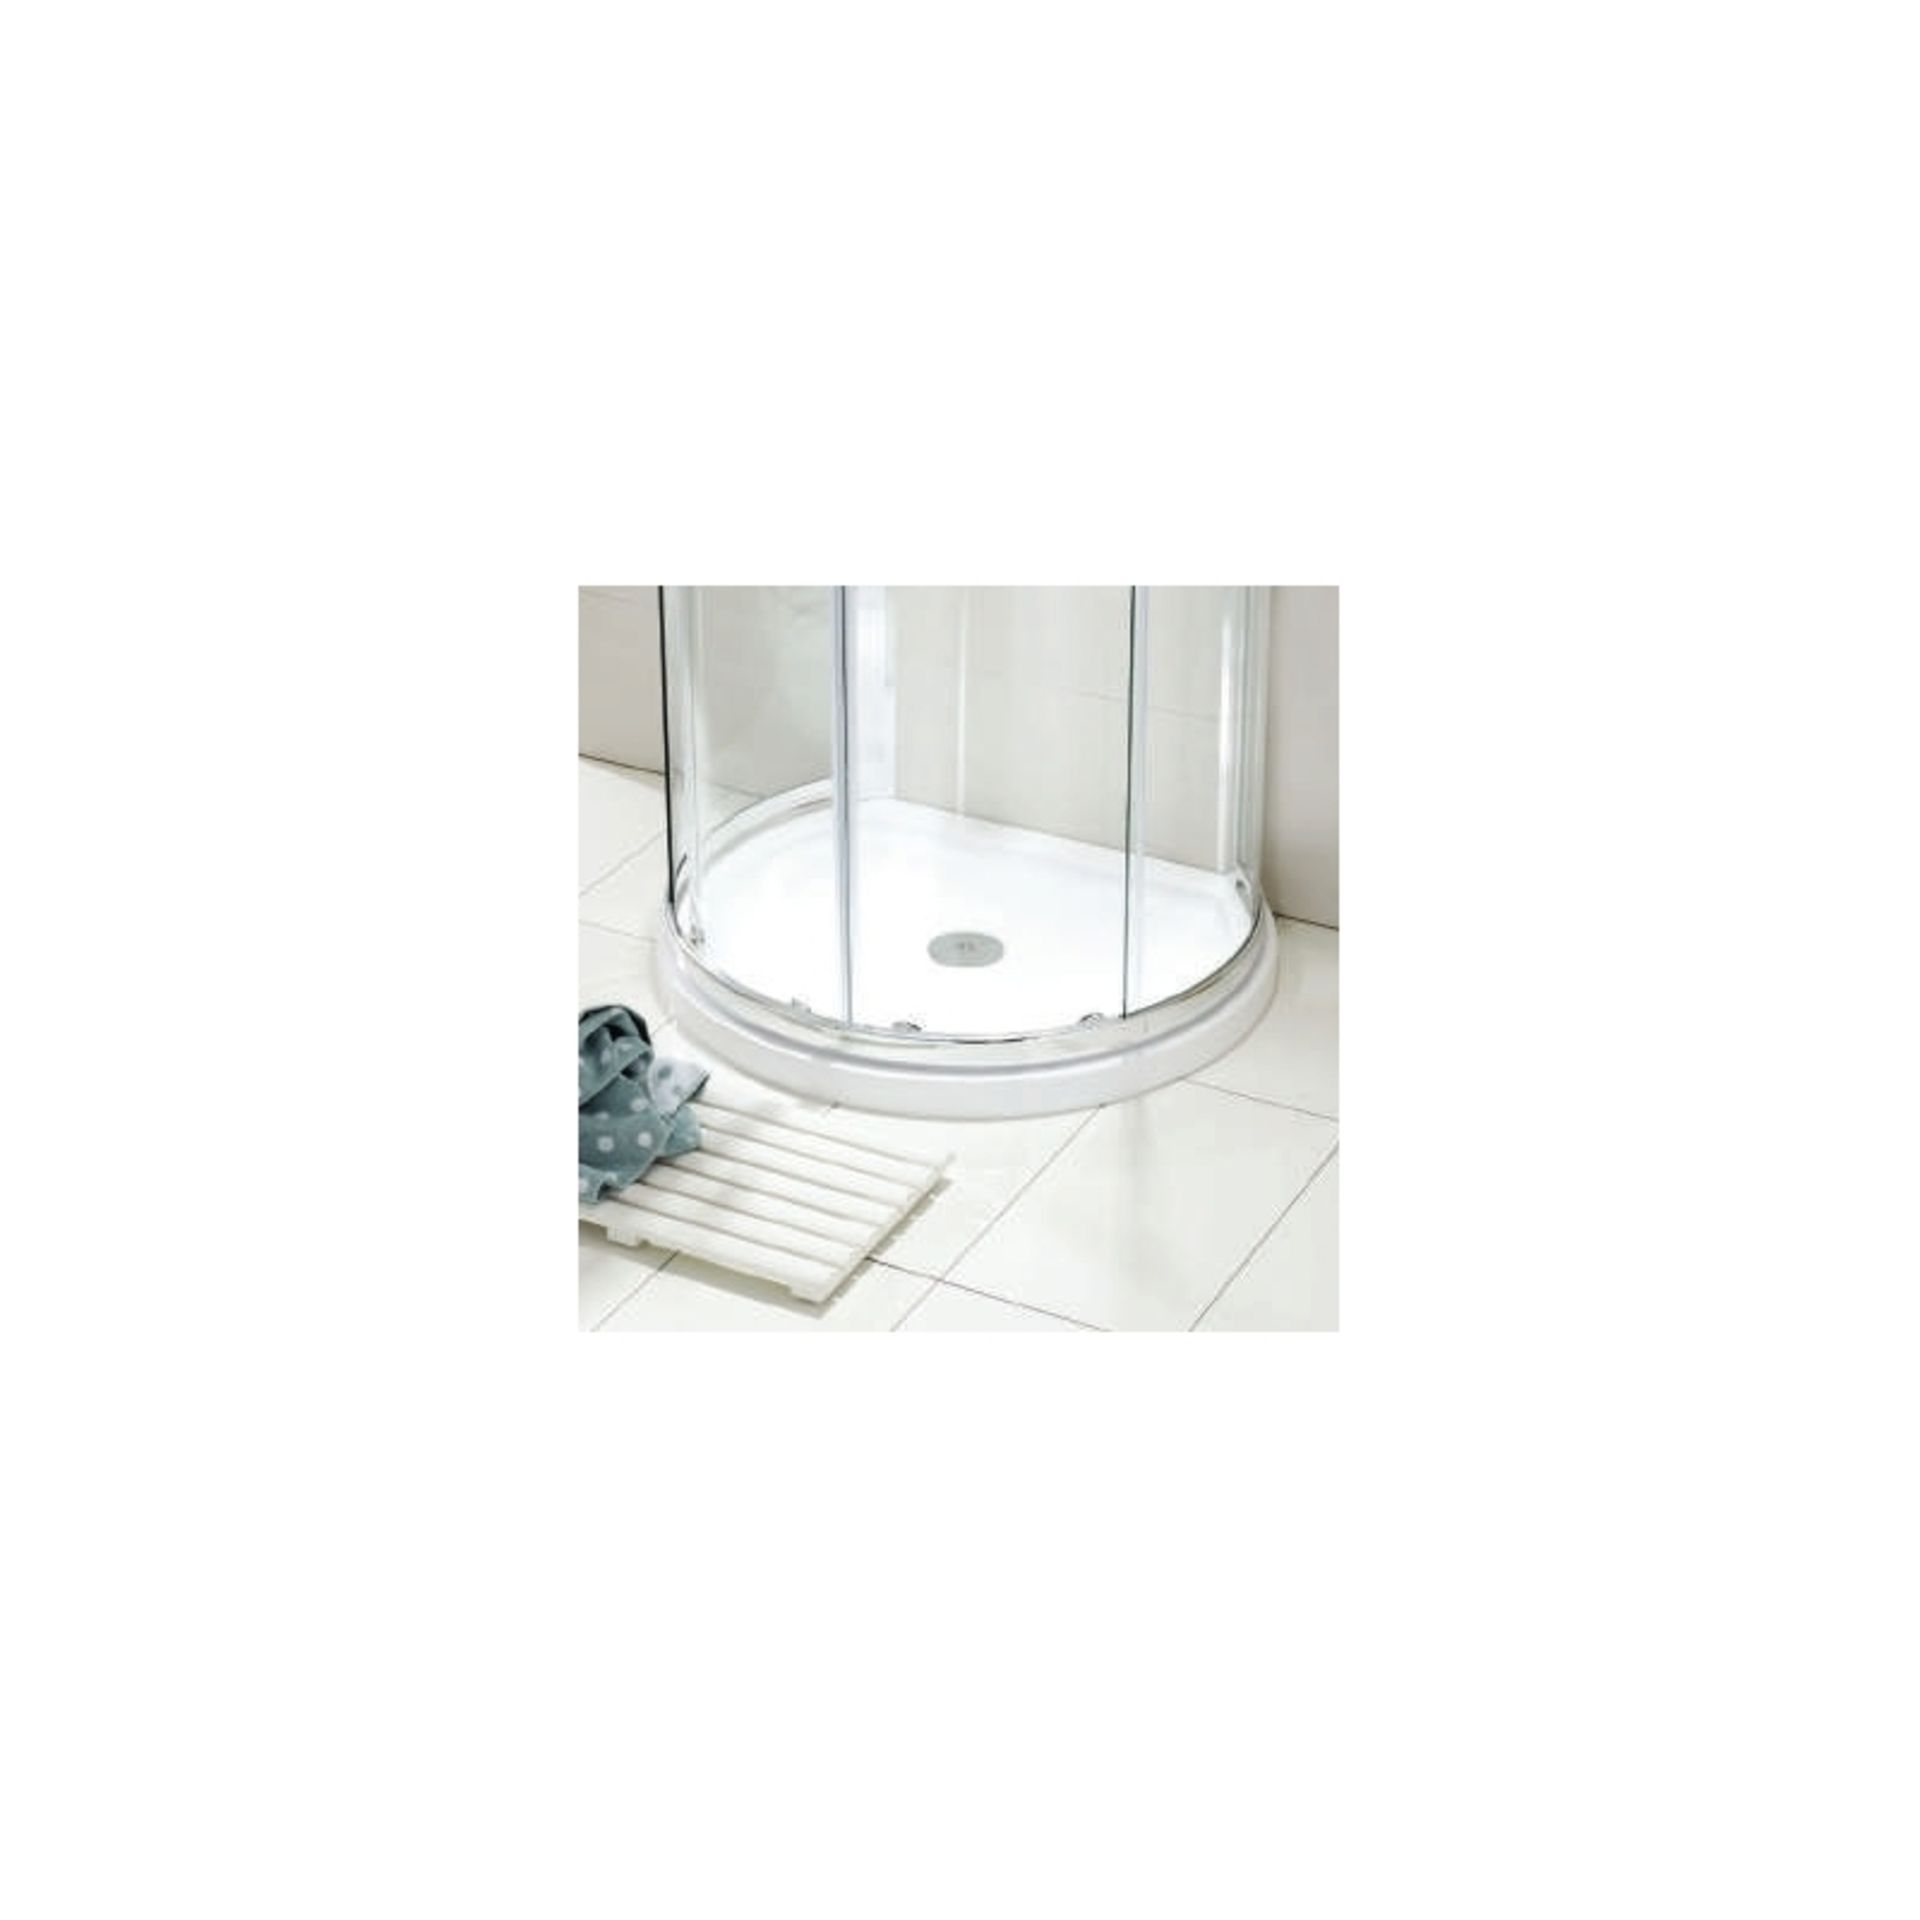 Brand New (PC129) Twyfords 770mm Hydro D Shape White Shower tray. Low profile ultra slim design Gel - Image 2 of 3